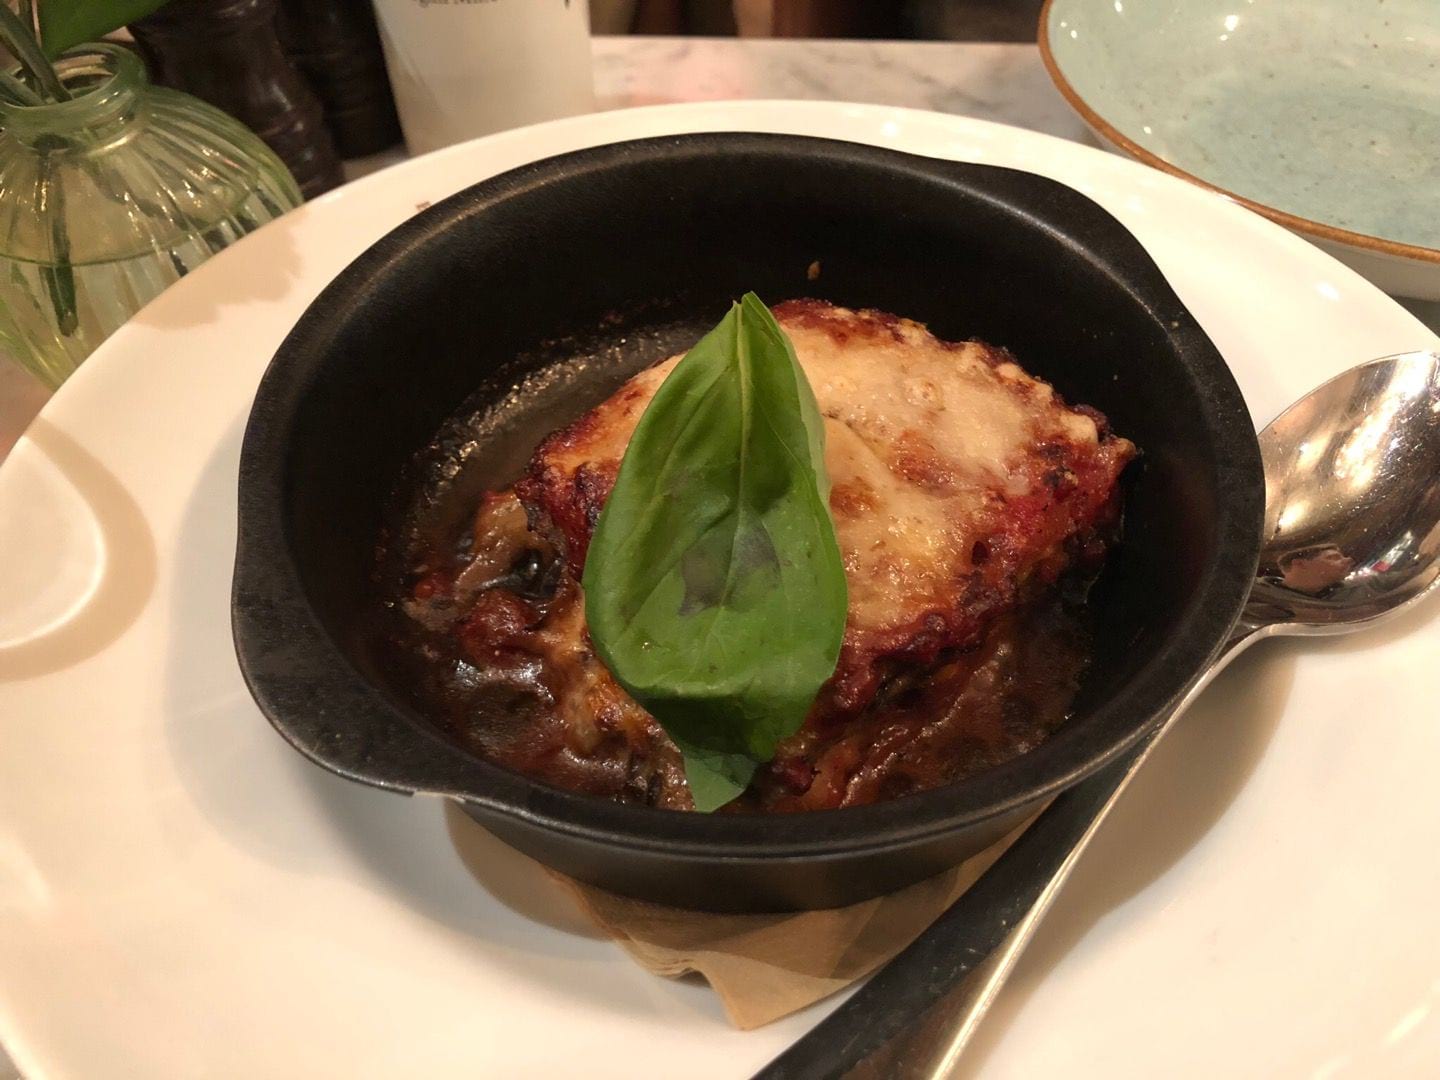 Aubergine Parmesan – Photo from Eataly by Agnes L. (14/05/2019)